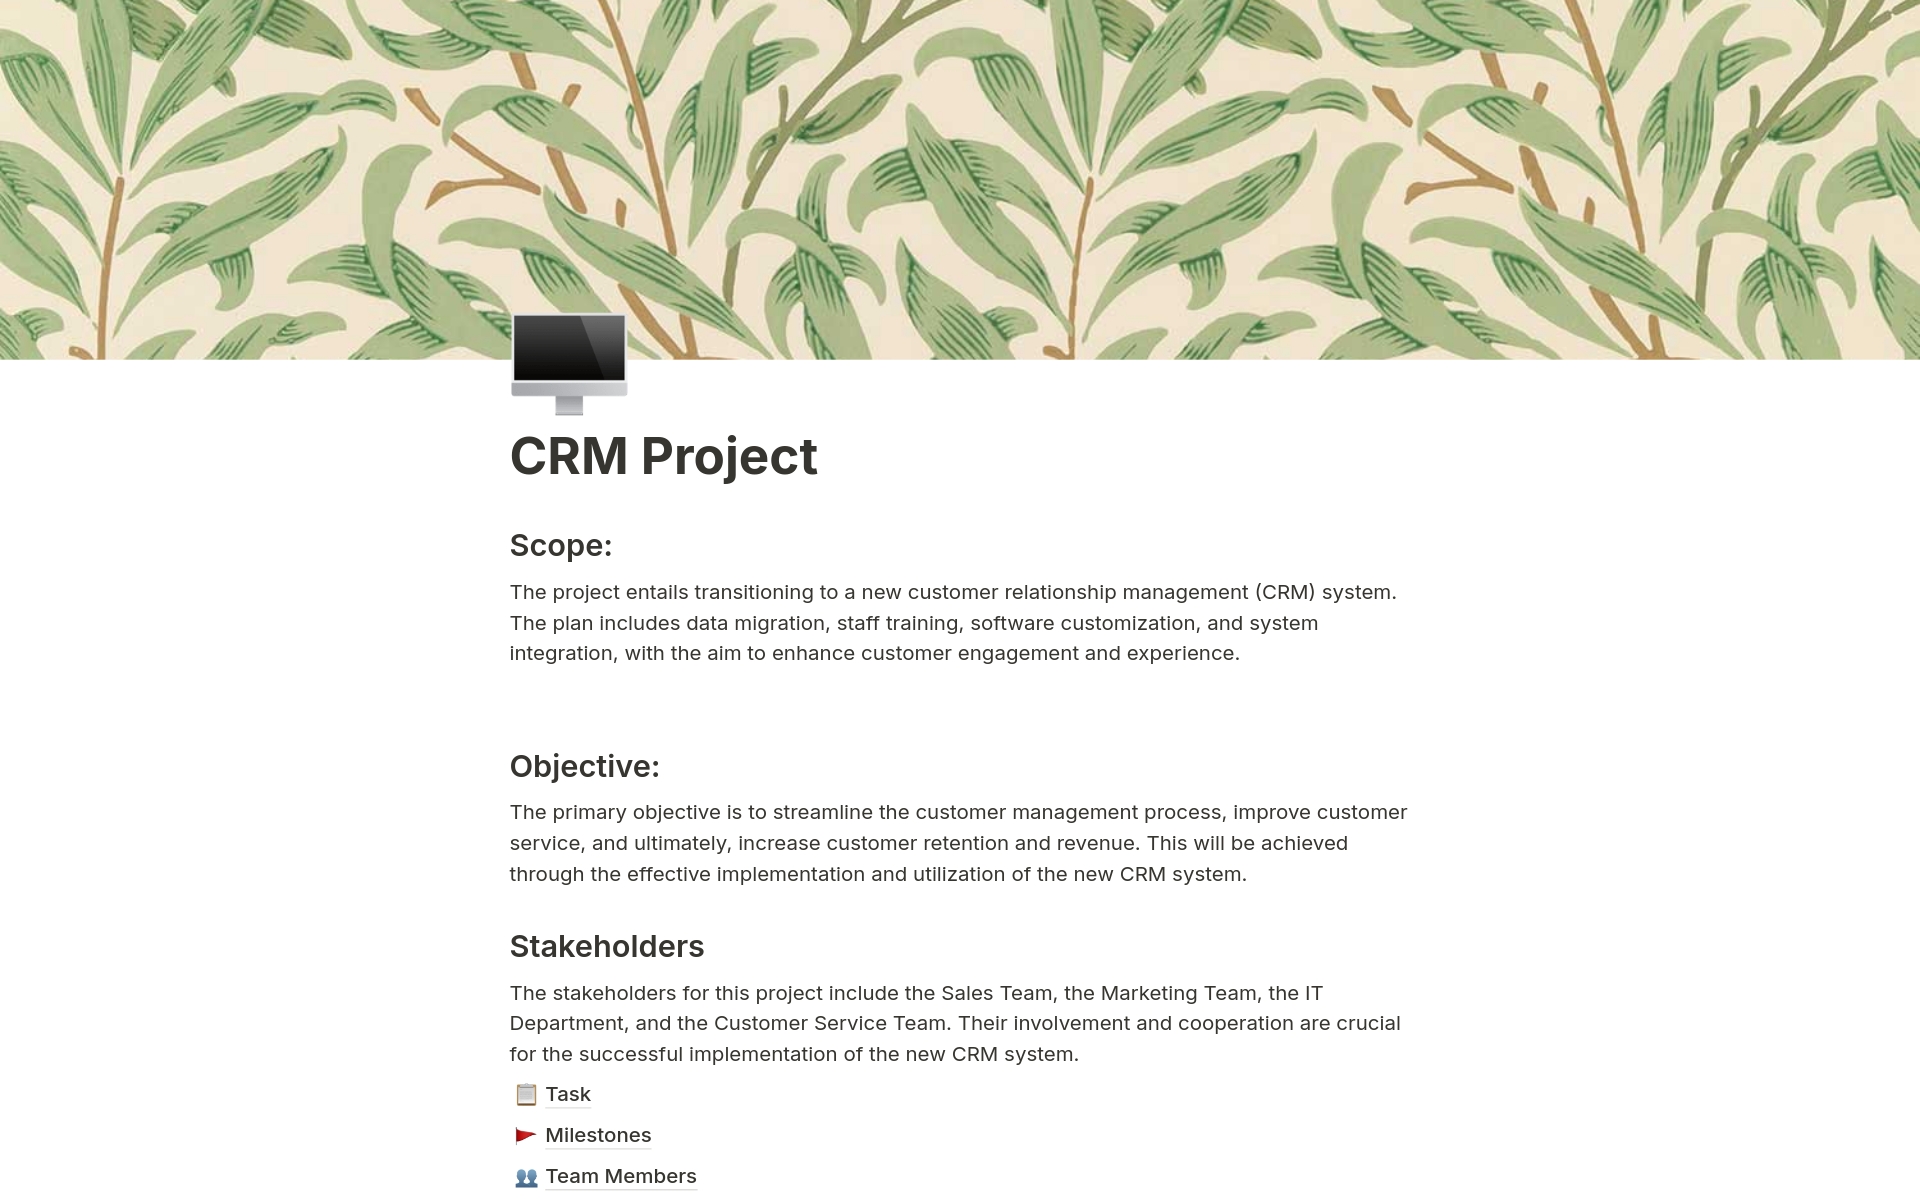 For CRM Projects